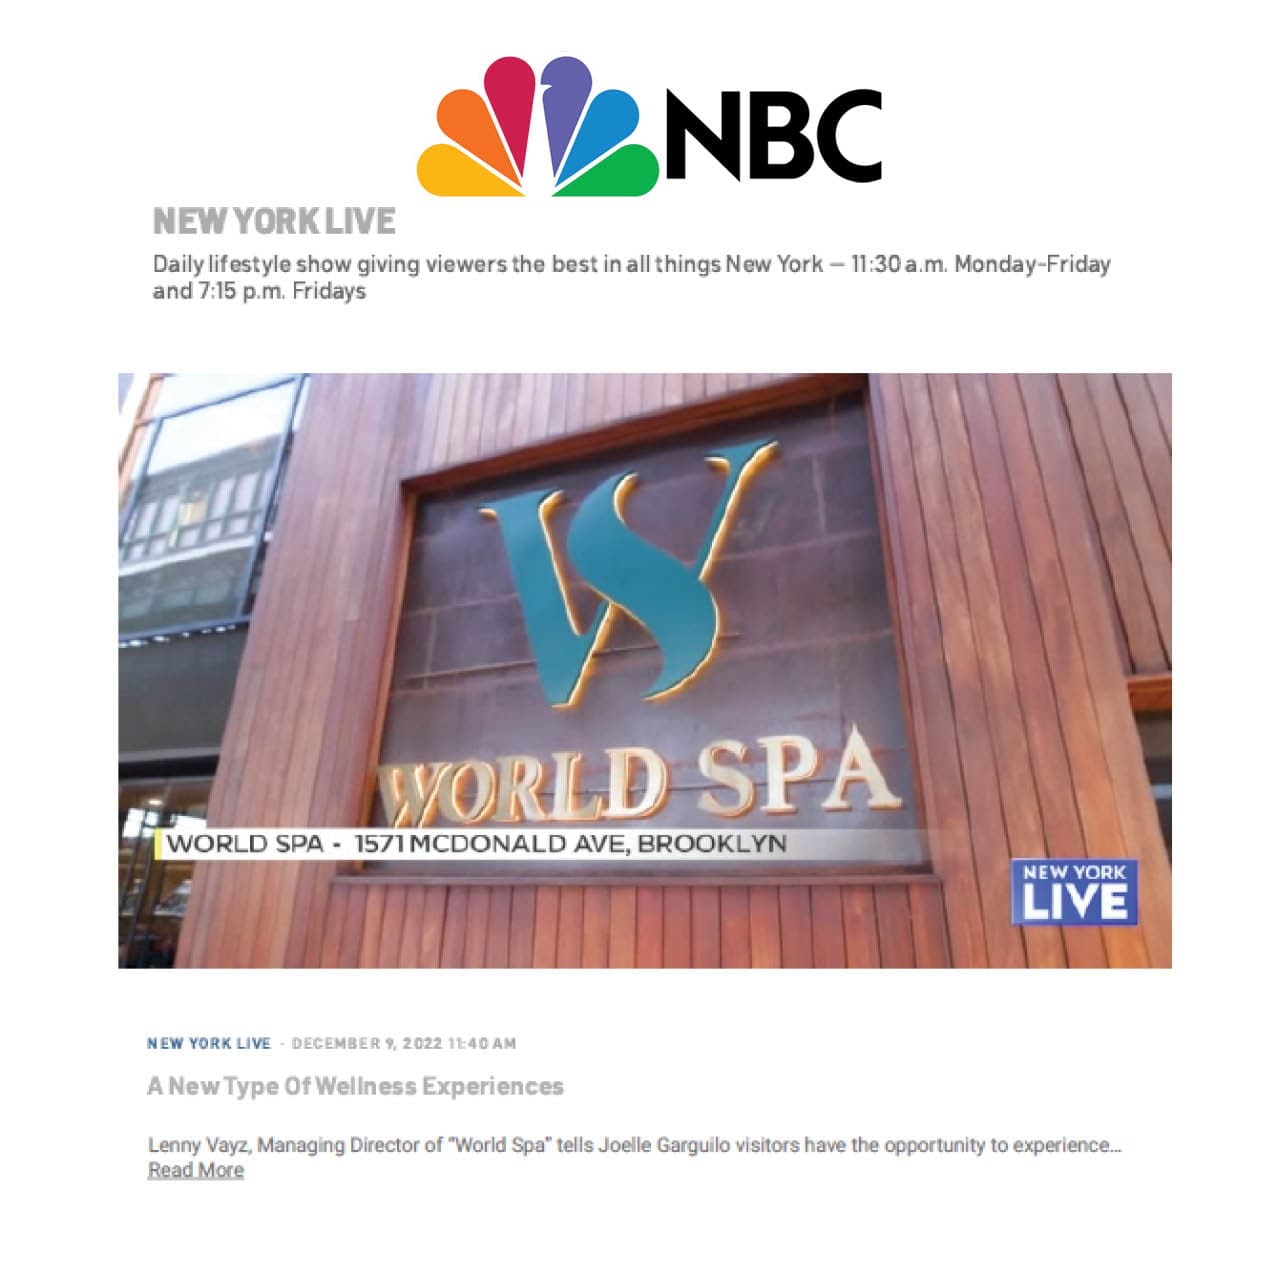 NBC channel featuring World Spa.